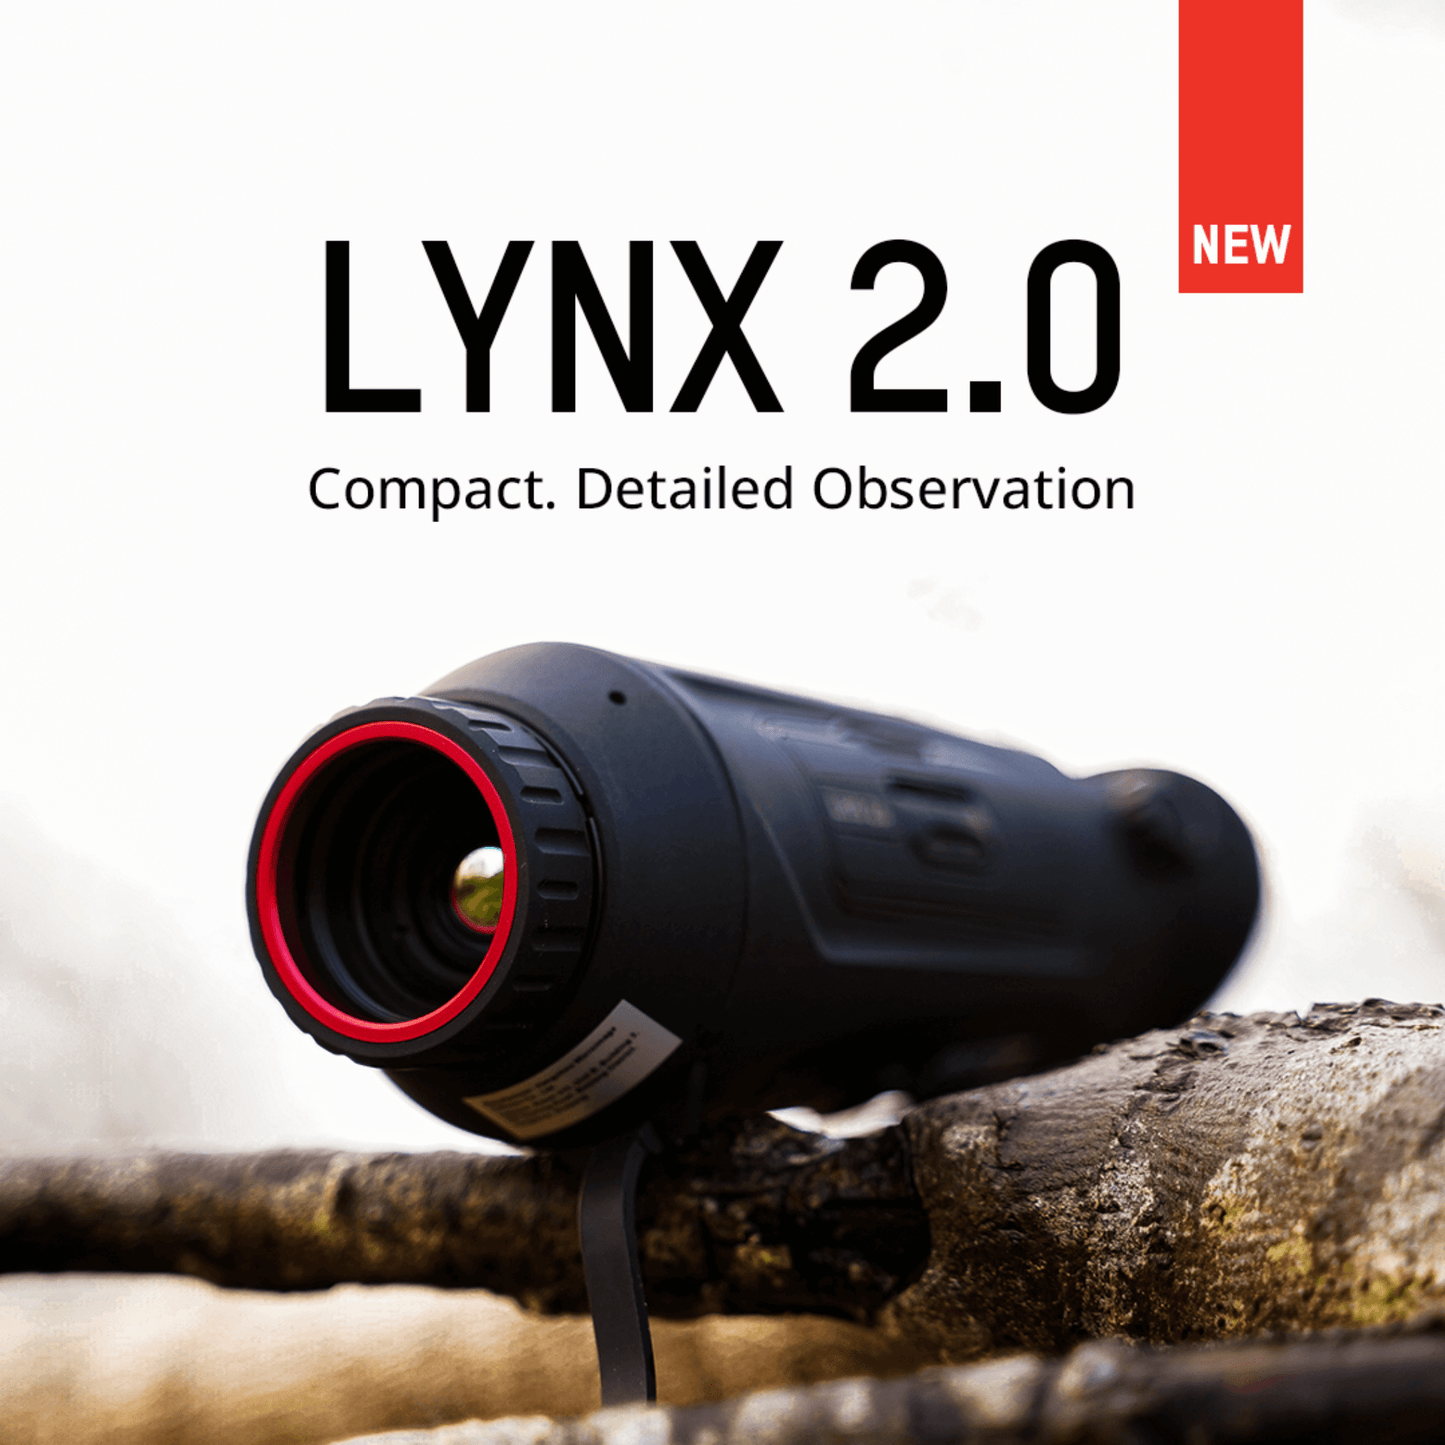 HikMicro Lynx LH15 2.0 Compact detailed observation